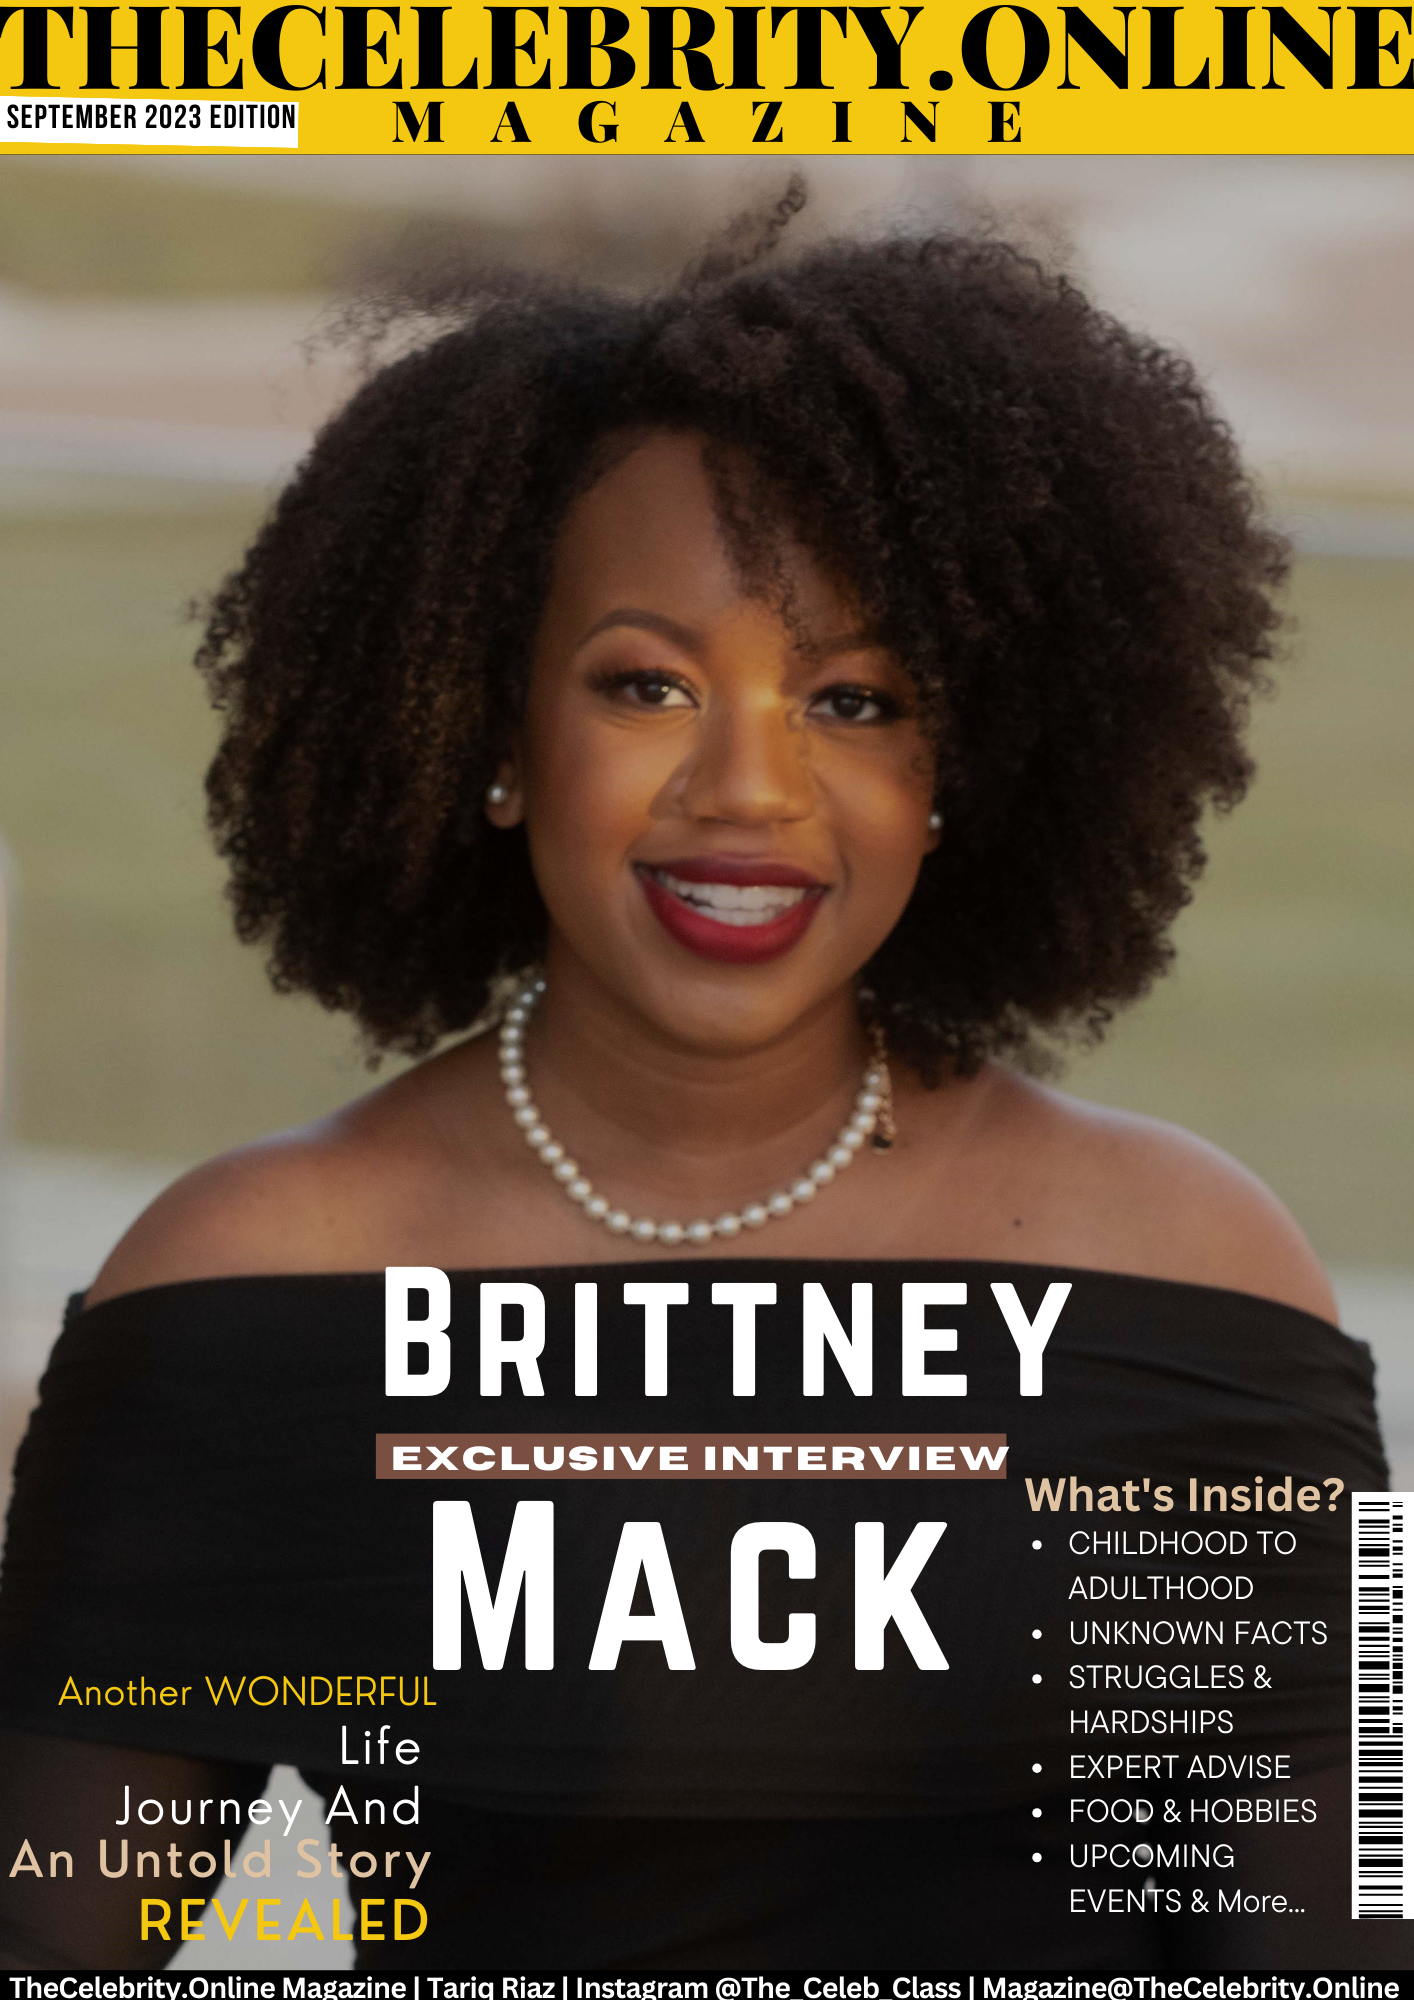 Brittney Mack Exclusive Interview – ‘Allowing Your Endeavors To Unfold With A Calculated And Impactful Presence’